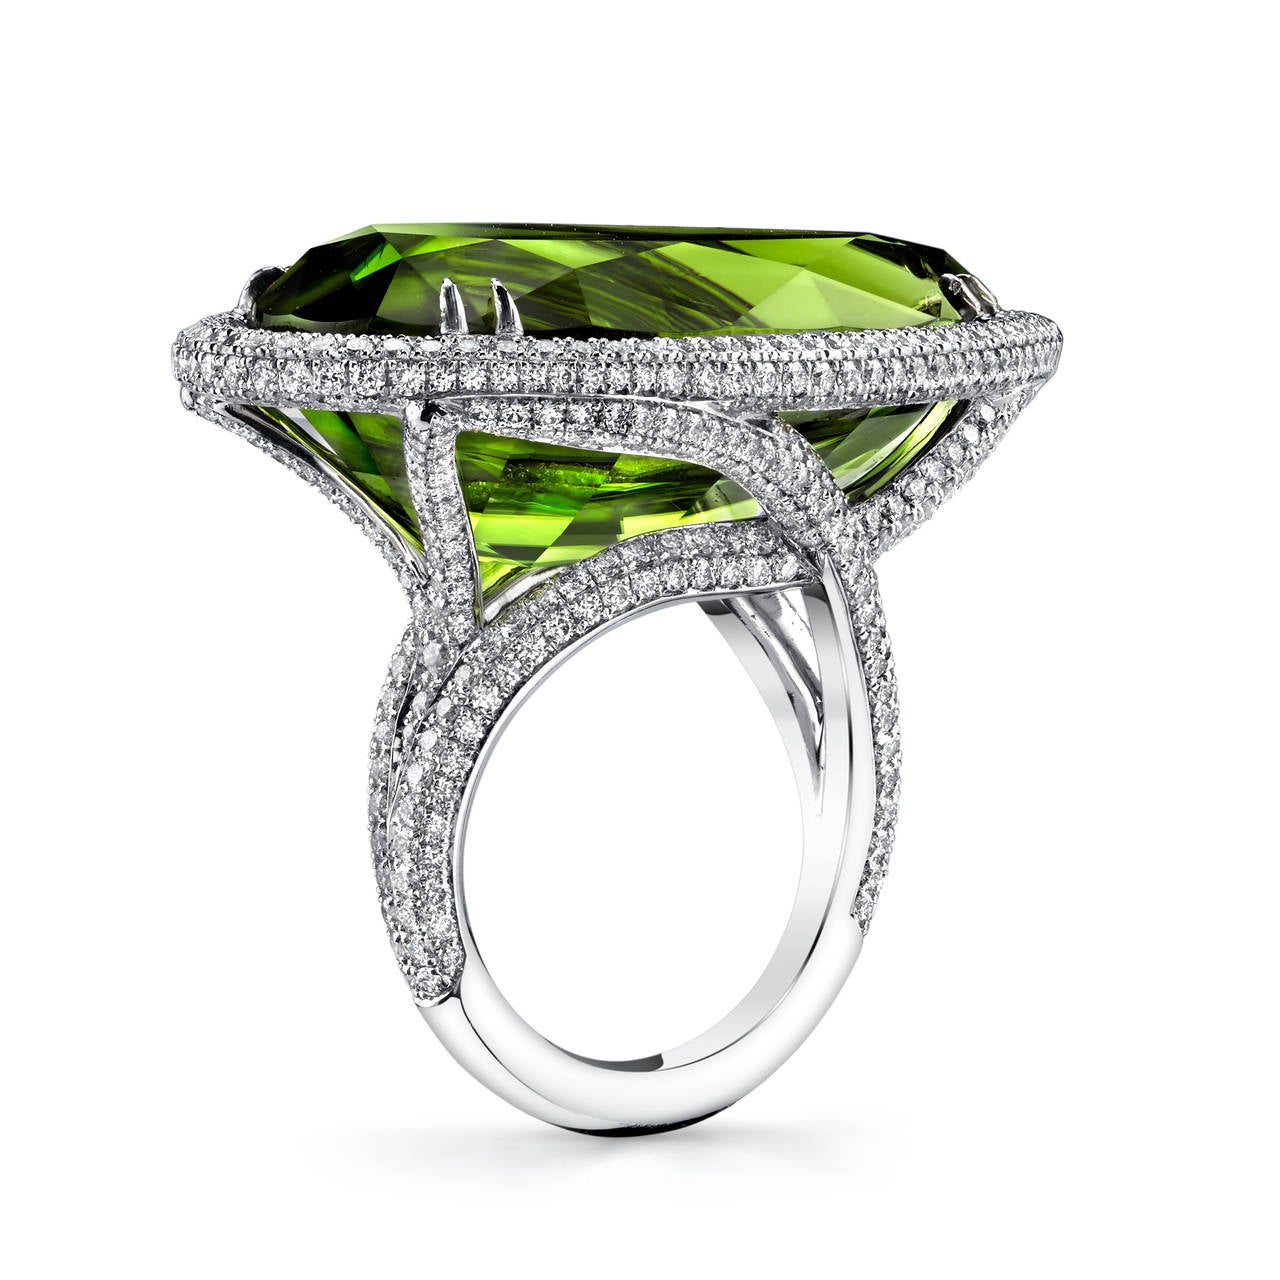 Pear Shaped Pakistani Peridot set in 18 Karat White Gold, accented with Micro Pave Ideal Cut White Diamonds. GIA Certified Center Stone with a Total Weight of 44.30CT. White Diamond Quality G/VS2 with a Total Weight of 4CT. 

Peridot’s color